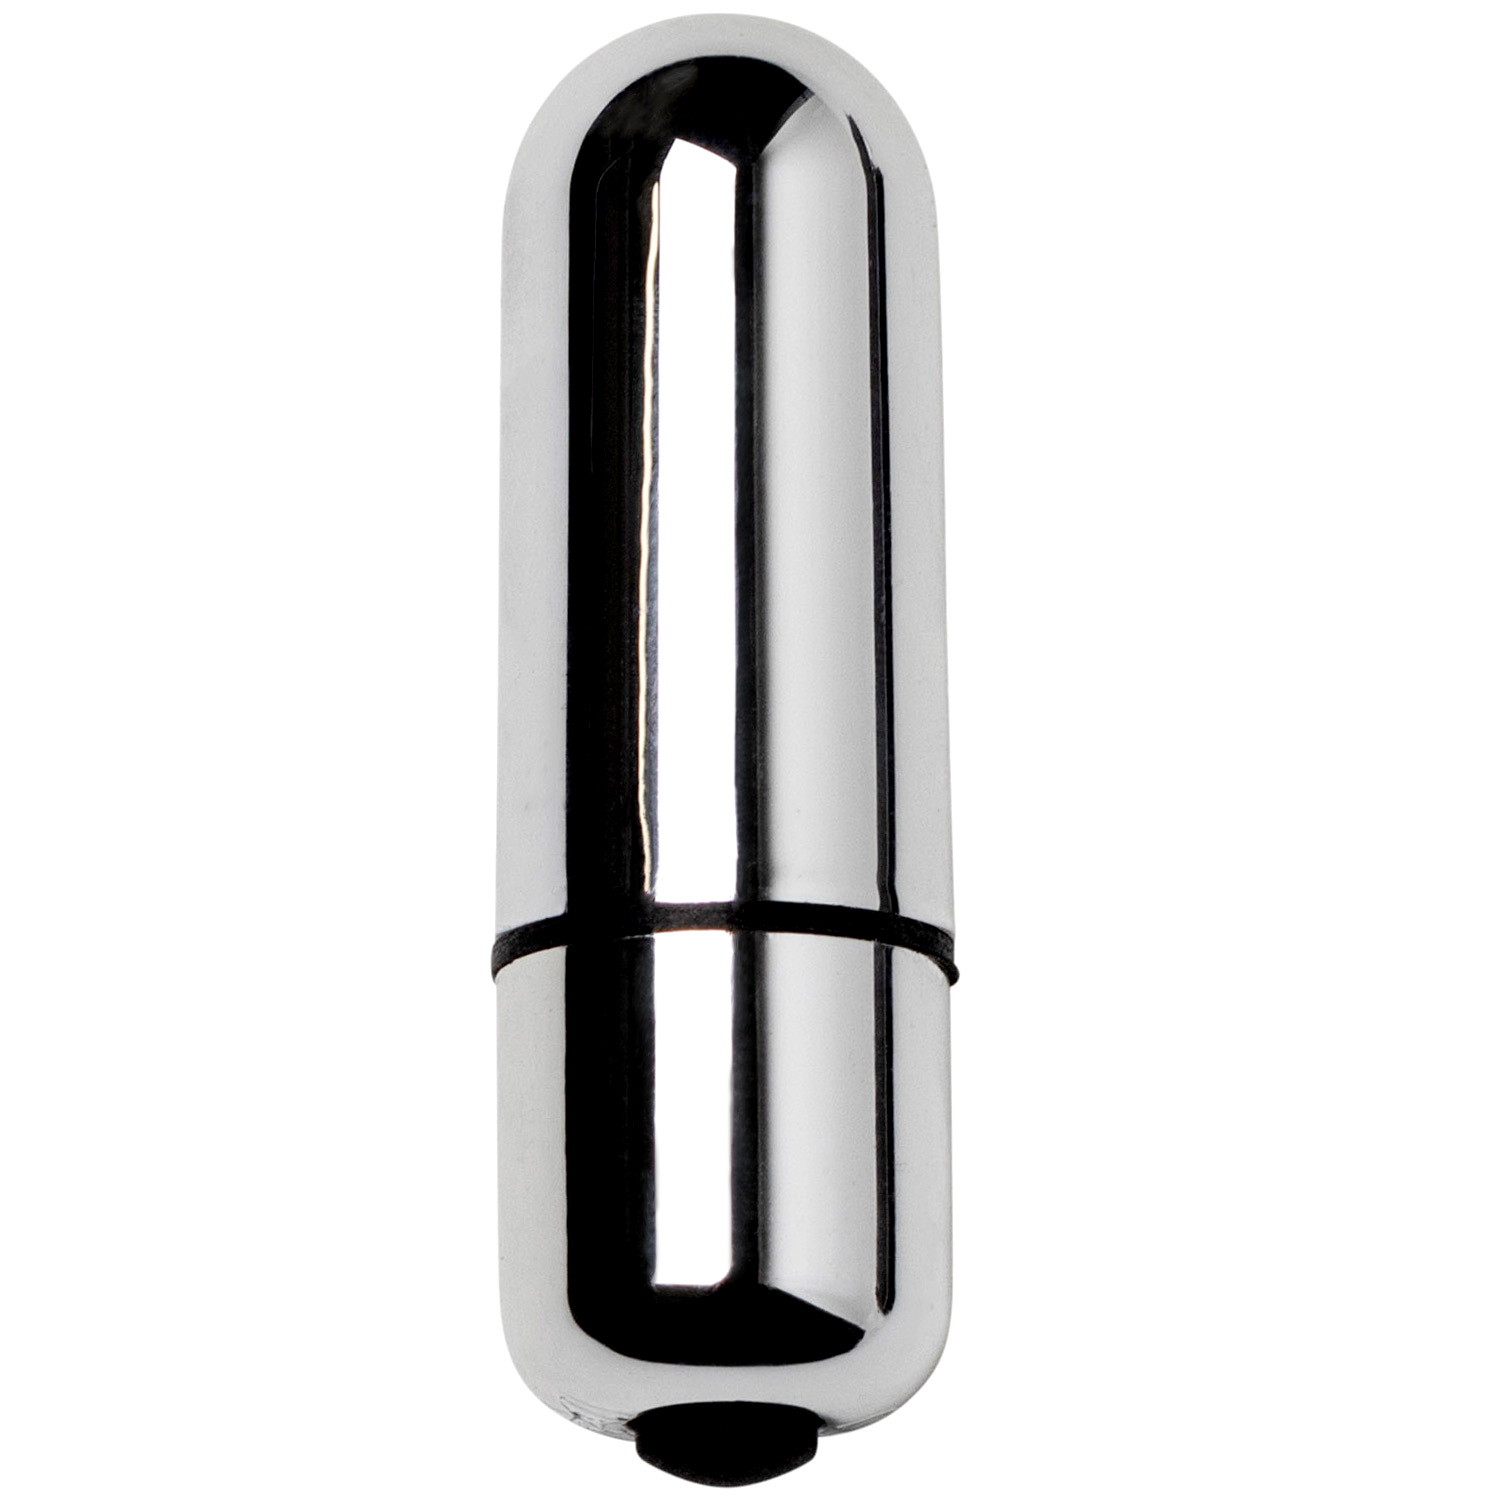 Sinful 7-Speed Silver Bullet Vibrator   - Silver